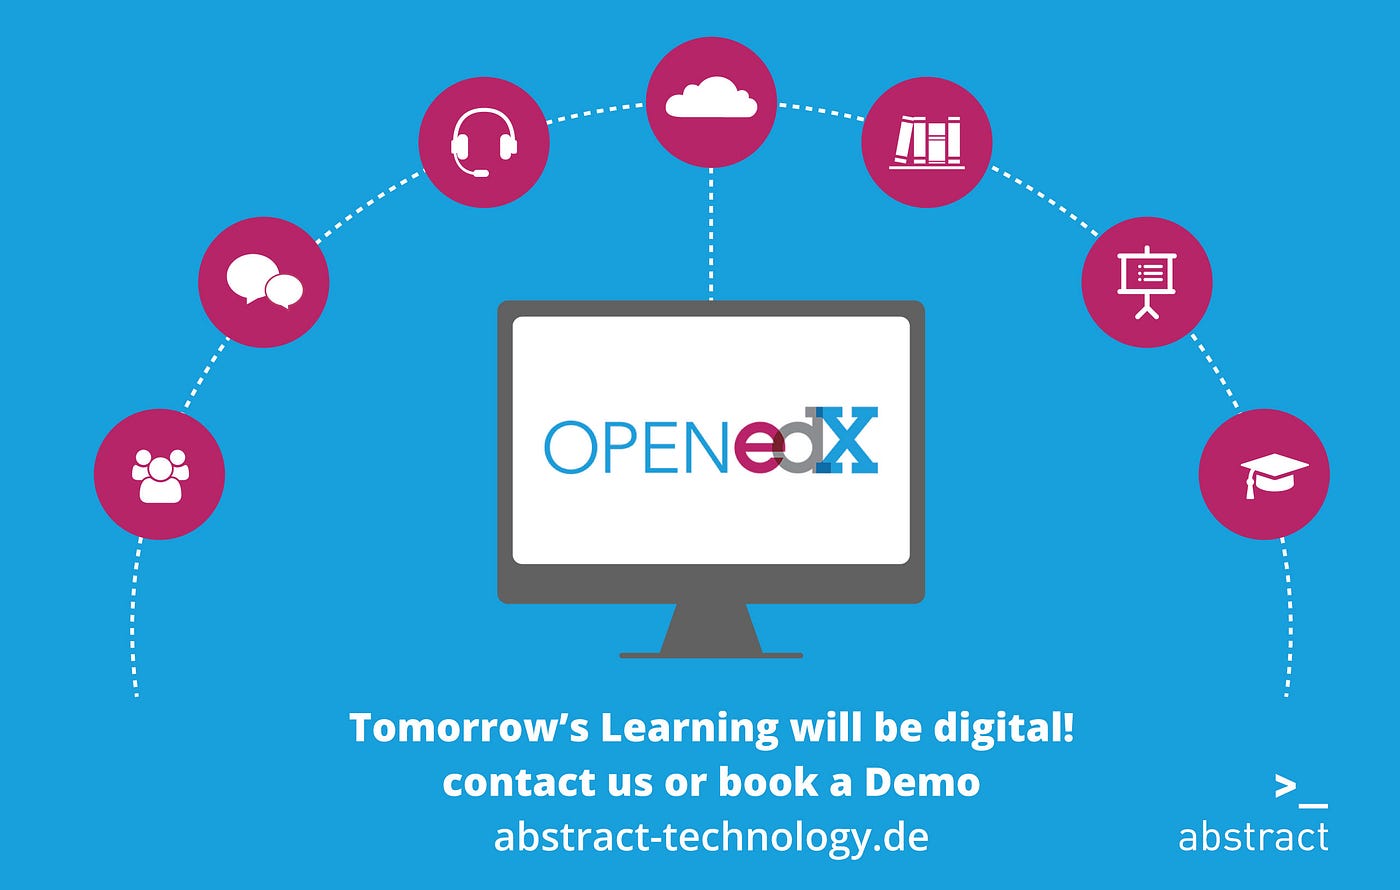 Open edX — A Learning Management System (LMS) with Built-In Authoring